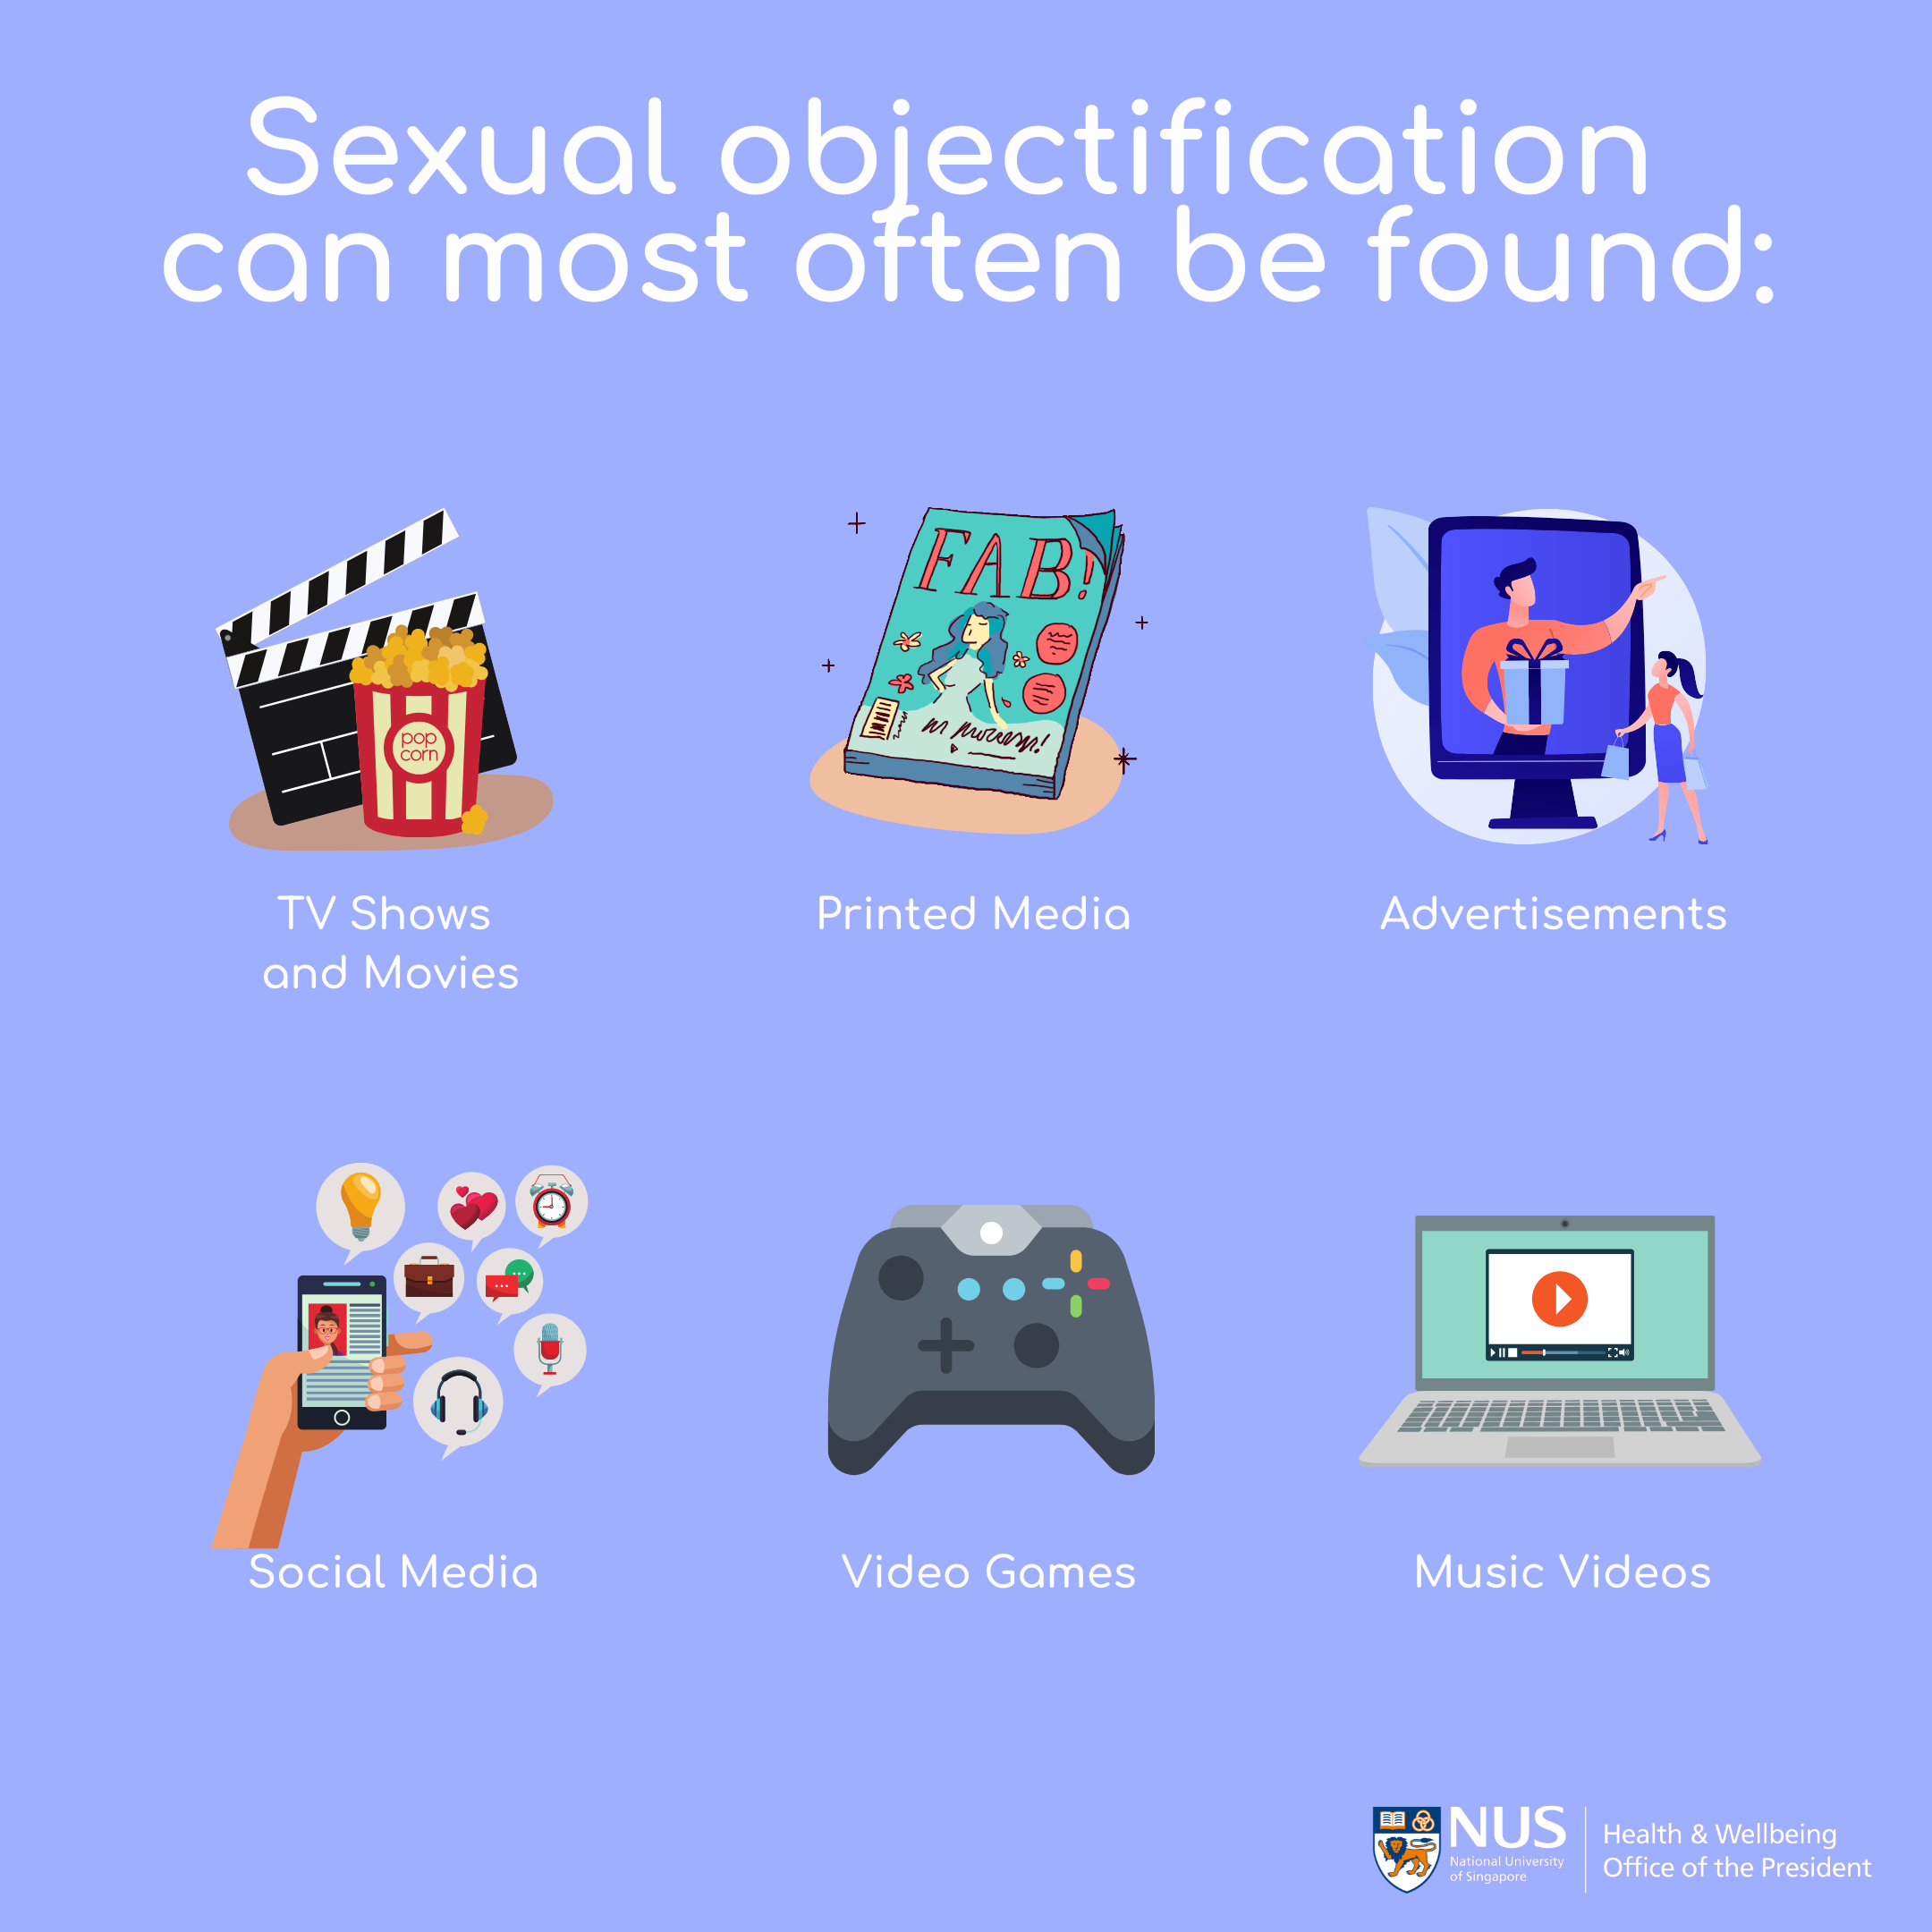 Sexual objectification can most often be found